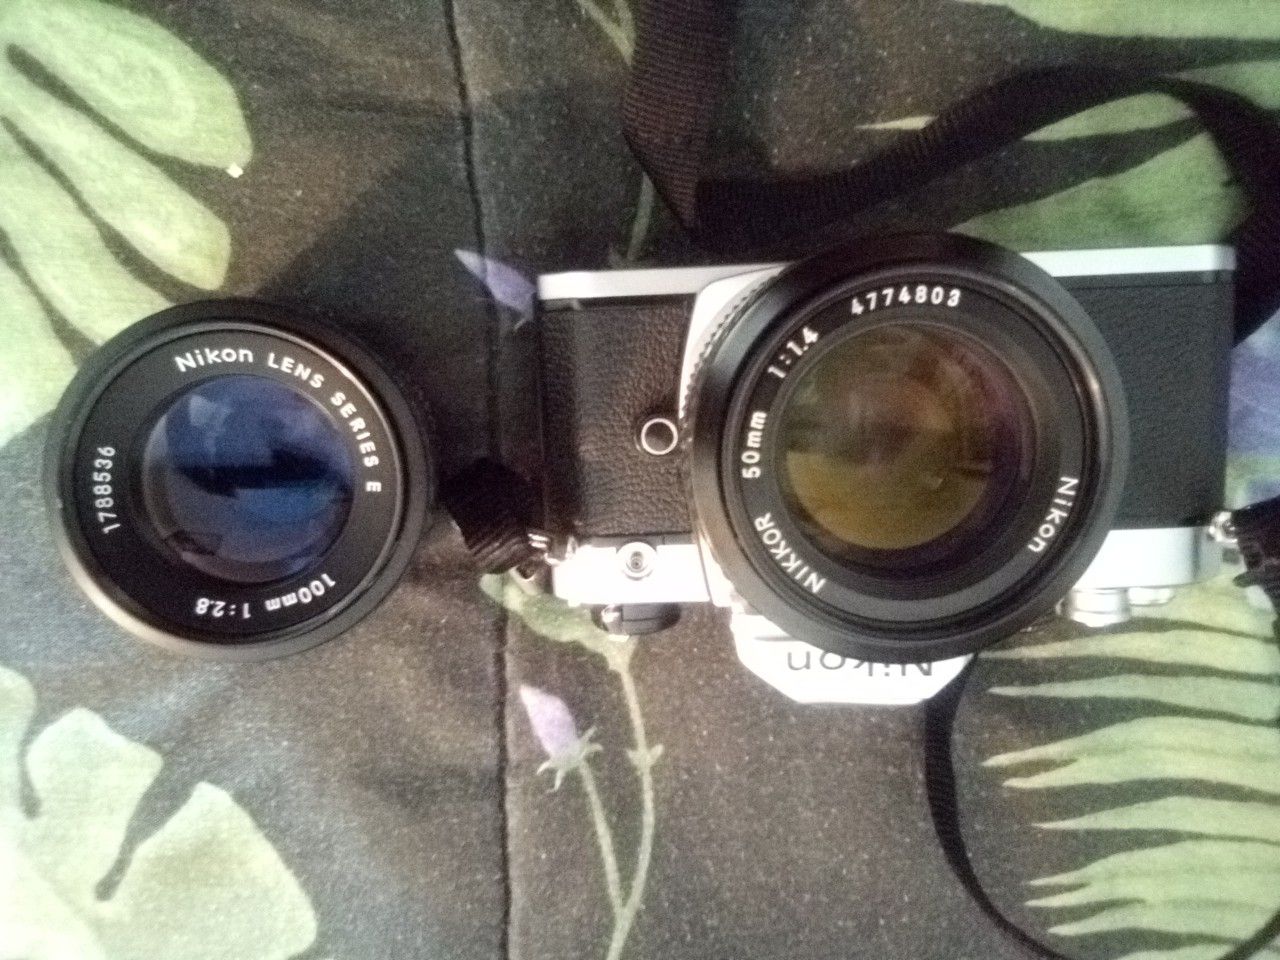 Nikon FM 35mm film camera with two lens